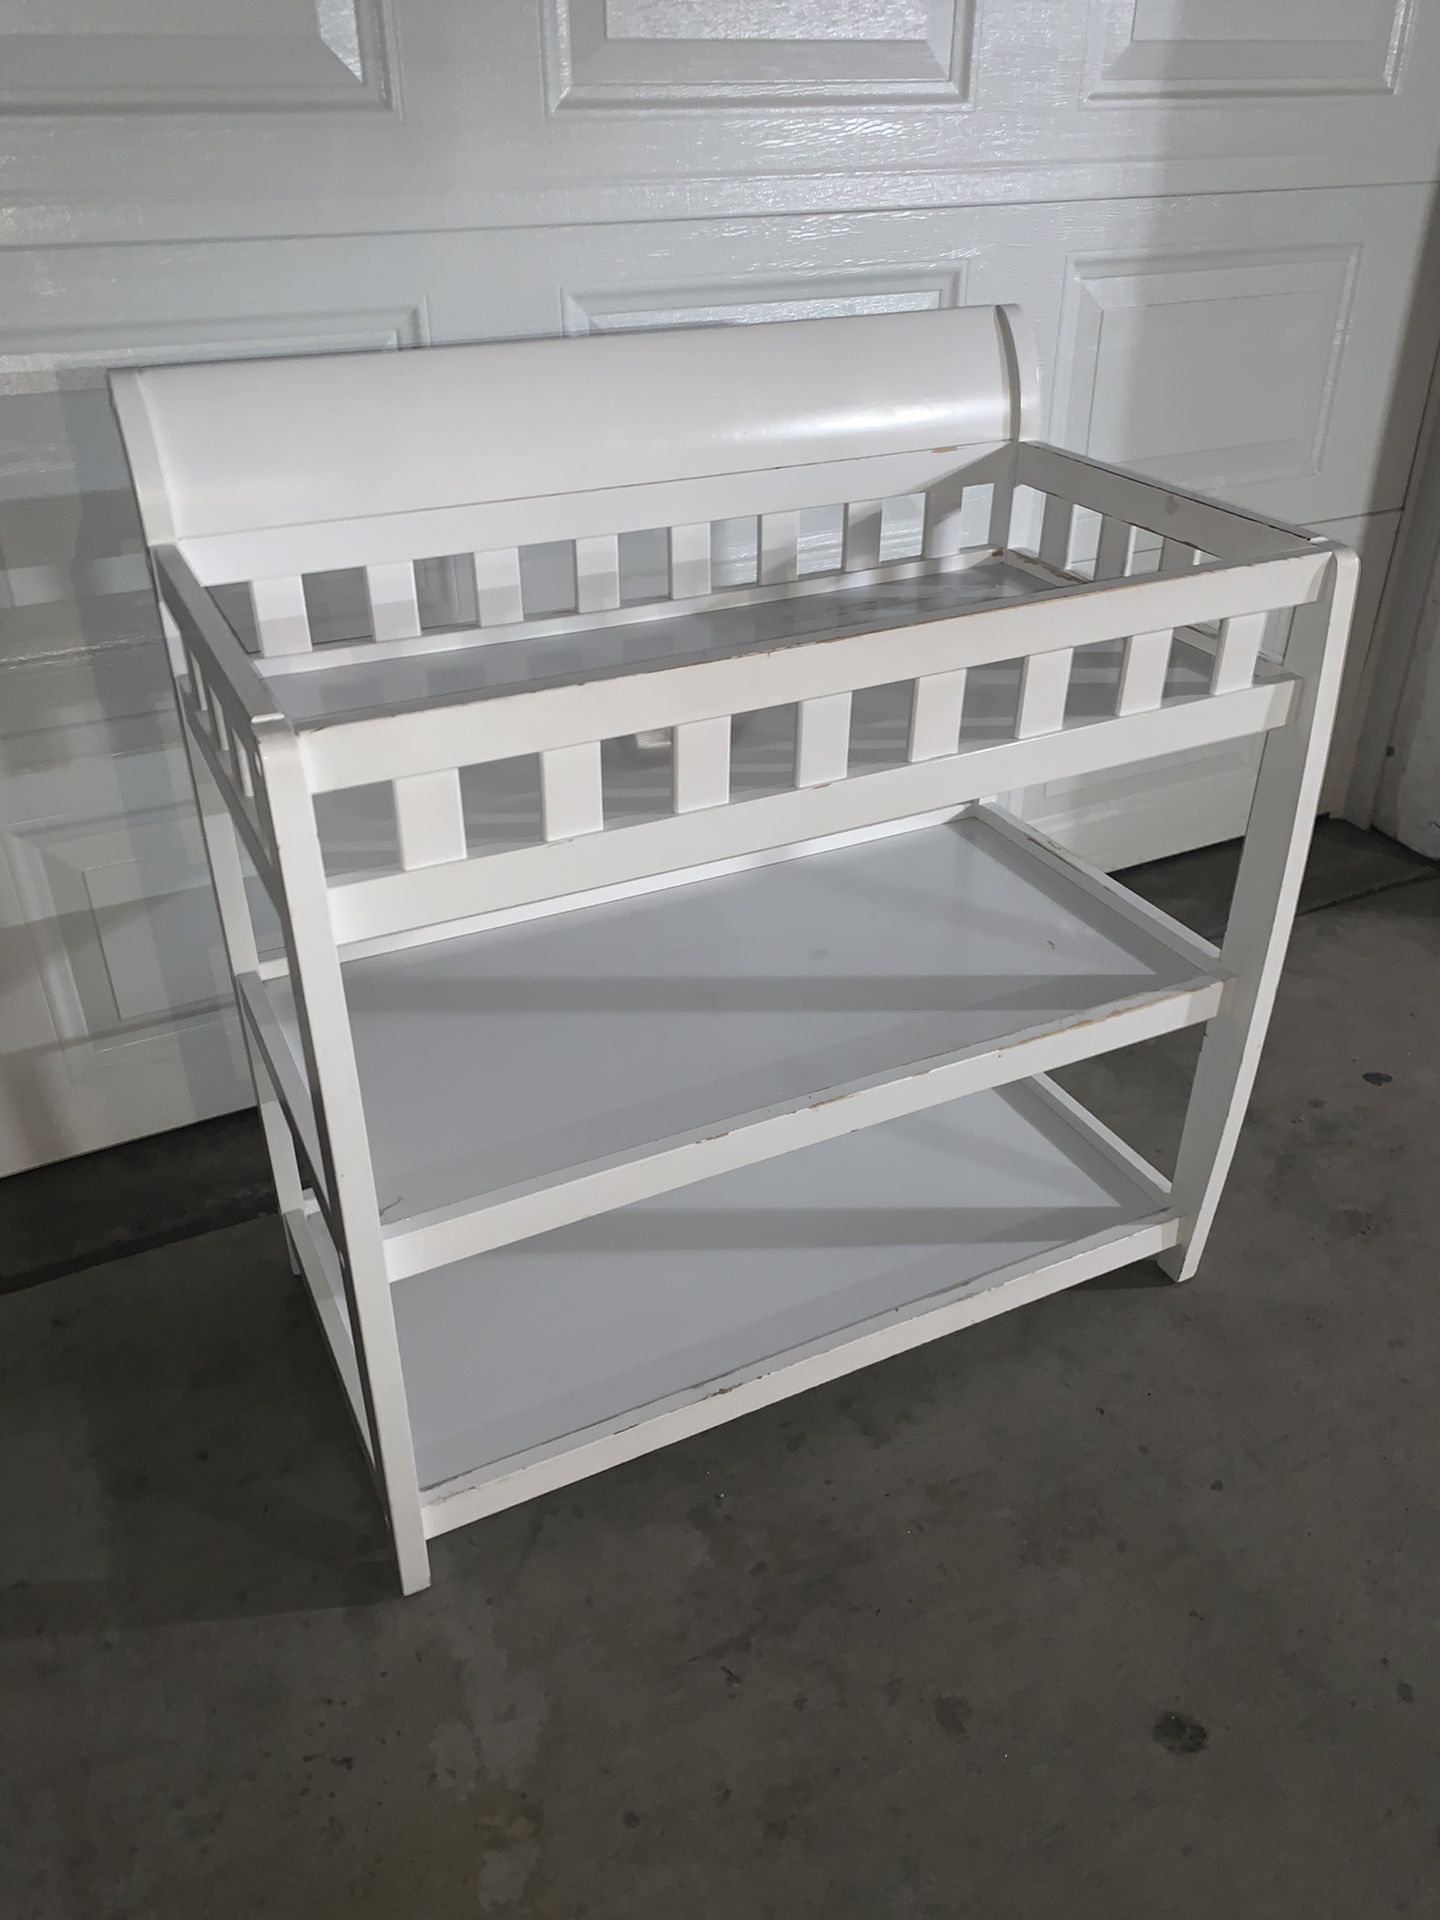 Graco Delta white changing table $50 OBO